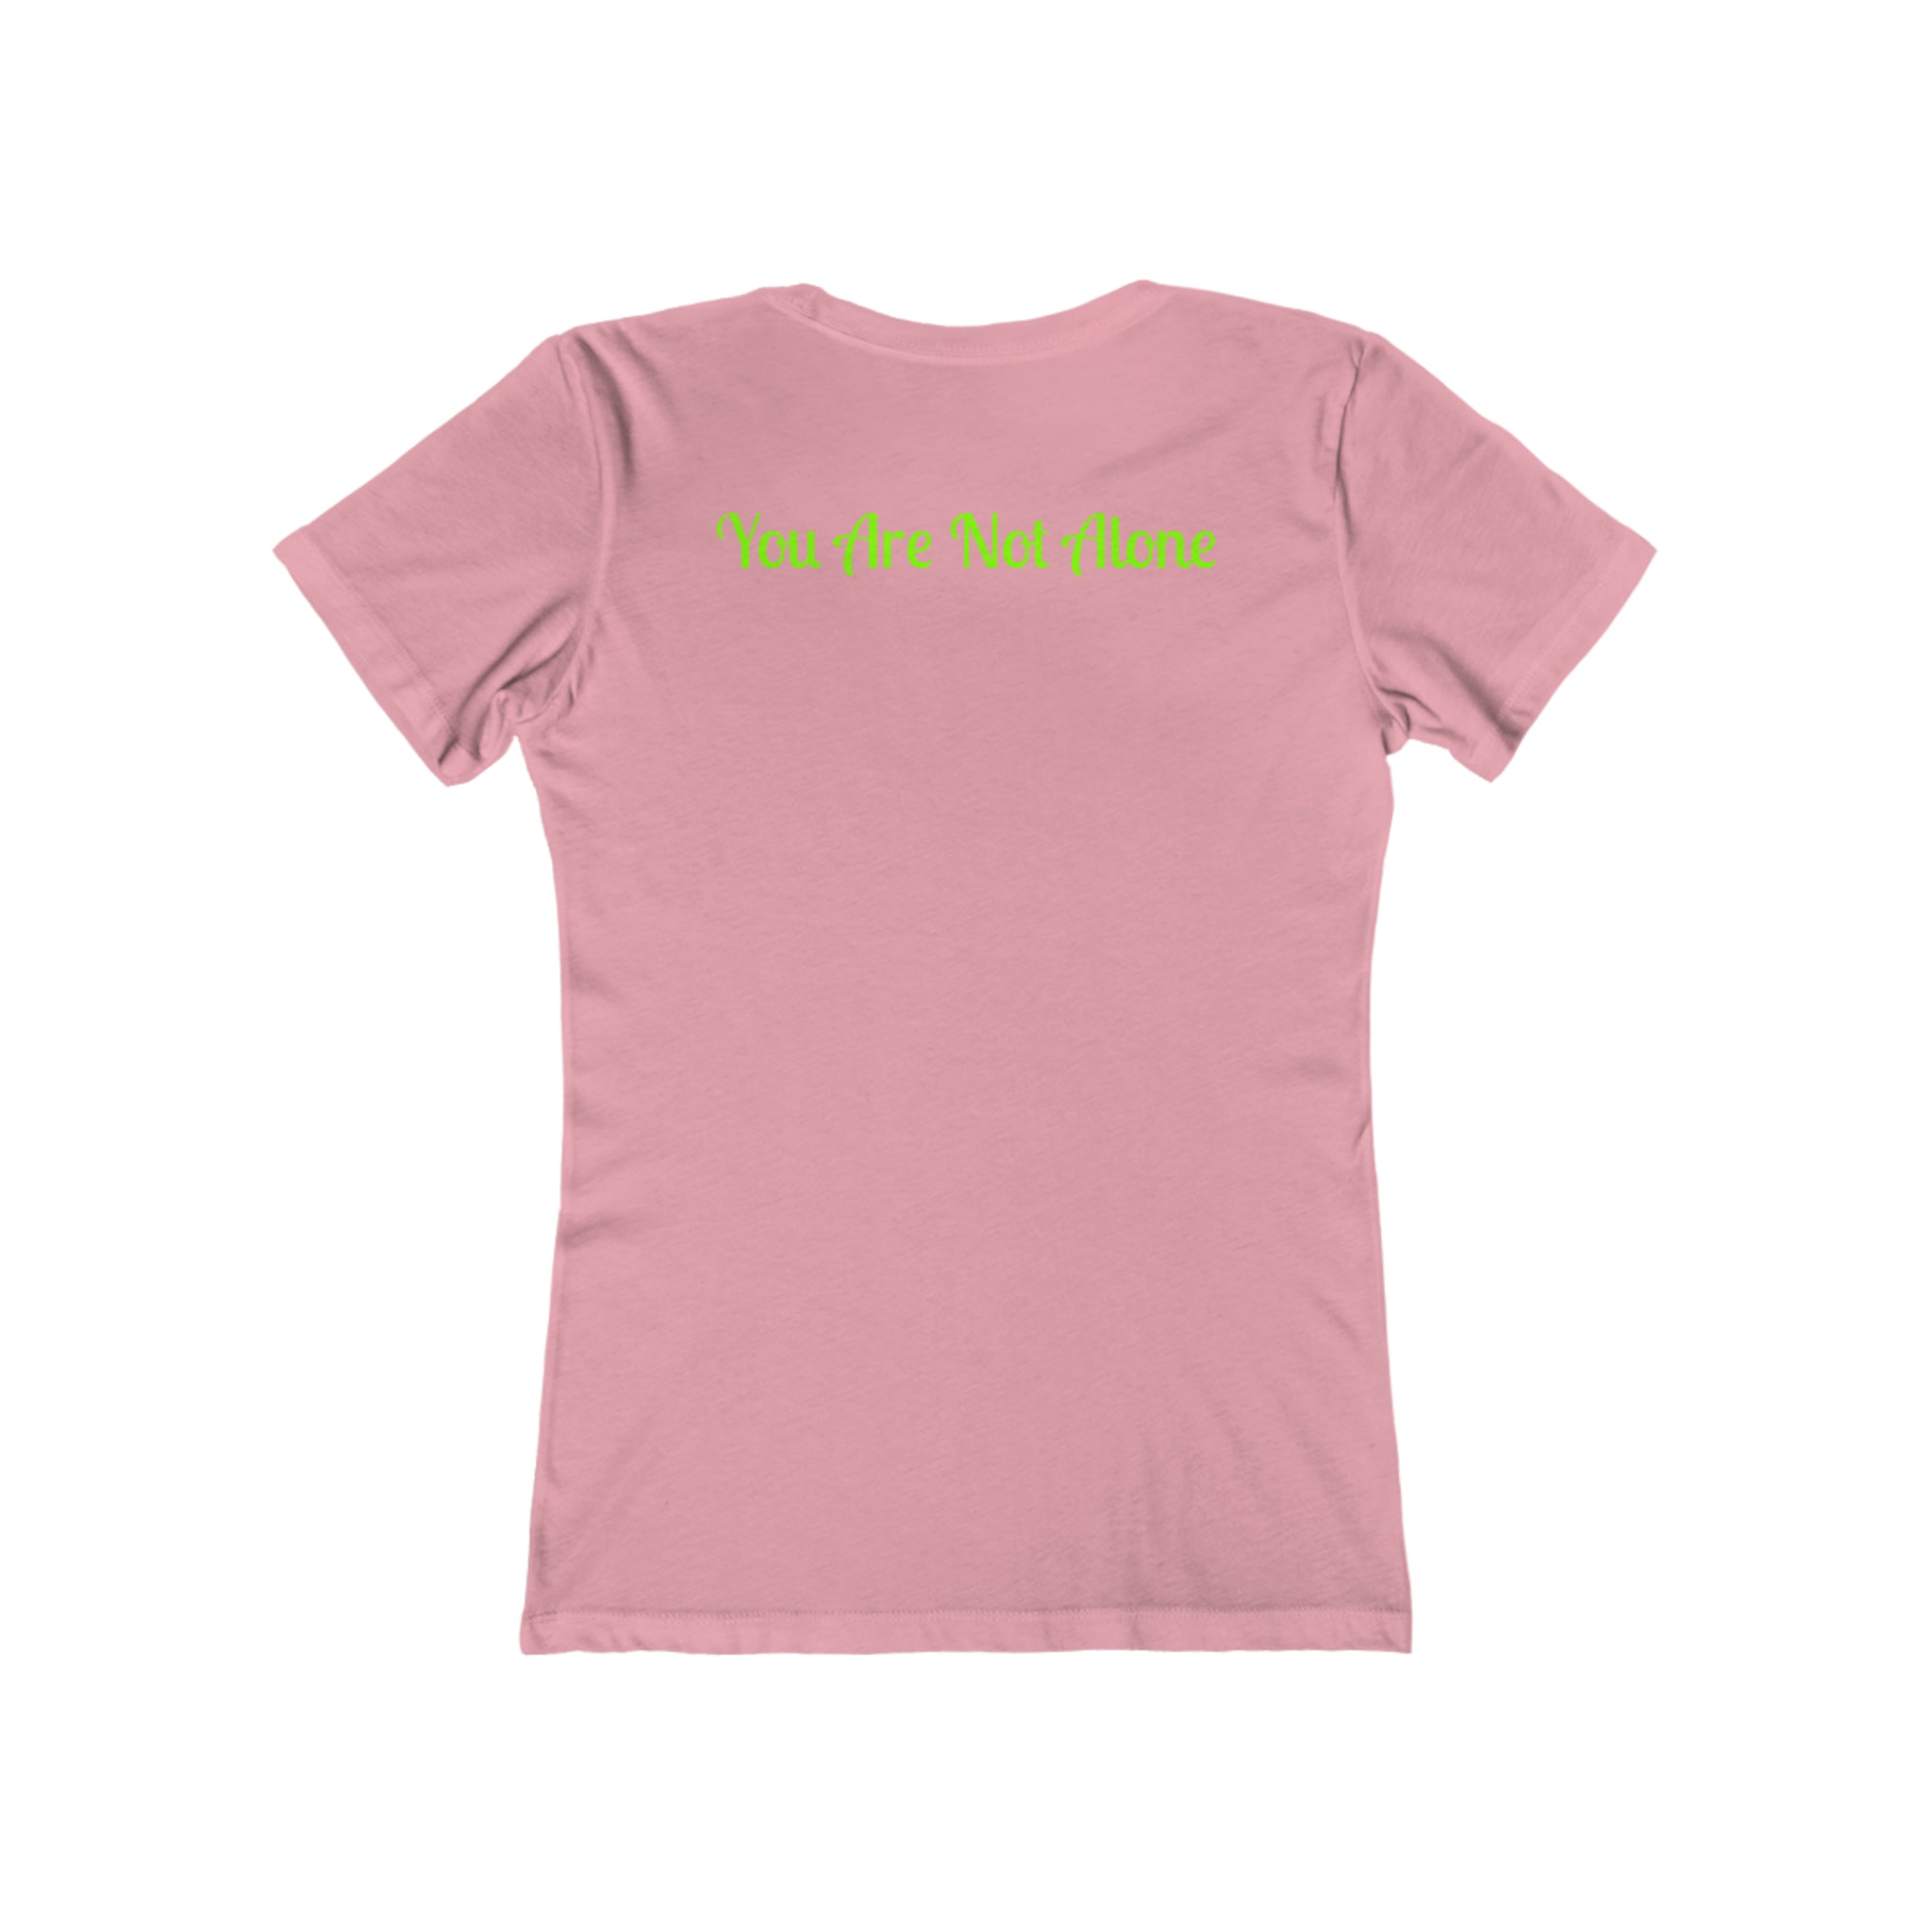 You Are Not Alone Boyfriend Tee: Stand Together Solid Light Pink Awareness Break the Stigma Mental Health Support Pledge Donation slim fit shirt Tee women shirt T-Shirt 8282019870666075211_2048_5b3d61e3-d9bc-4a9d-9c88-ce9cf01b0195 Printify